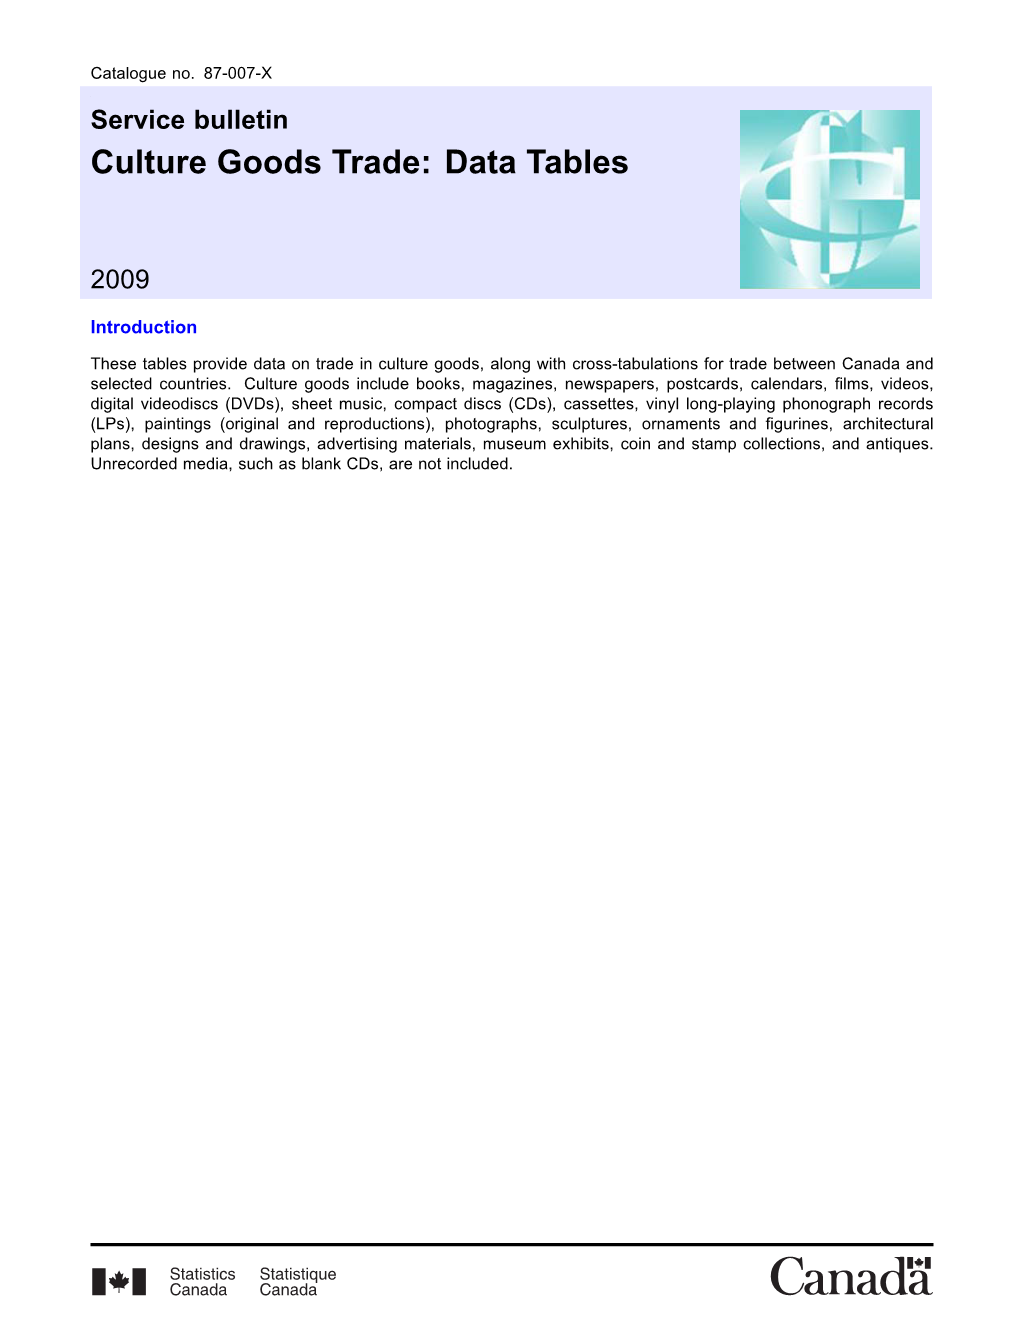 Culture Goods Trade: Data Tables